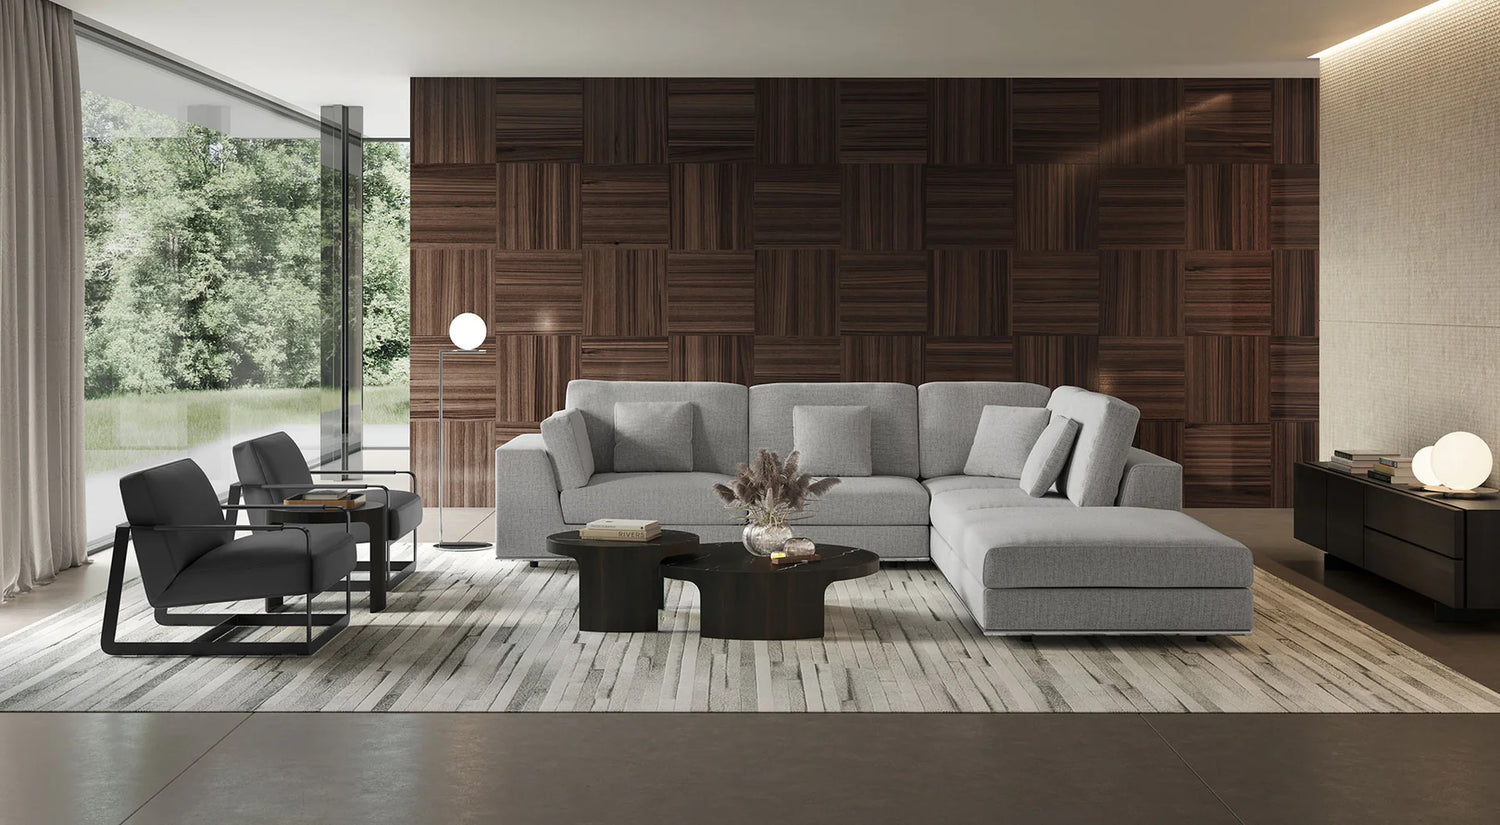 A modern living room features a large, gray sectional sofa with cushions, a dark wooden coffee table, two black armchairs, and a matching sideboard. The back wall is covered in a textured wooden panel design, and a large window offers a view of lush greenery.